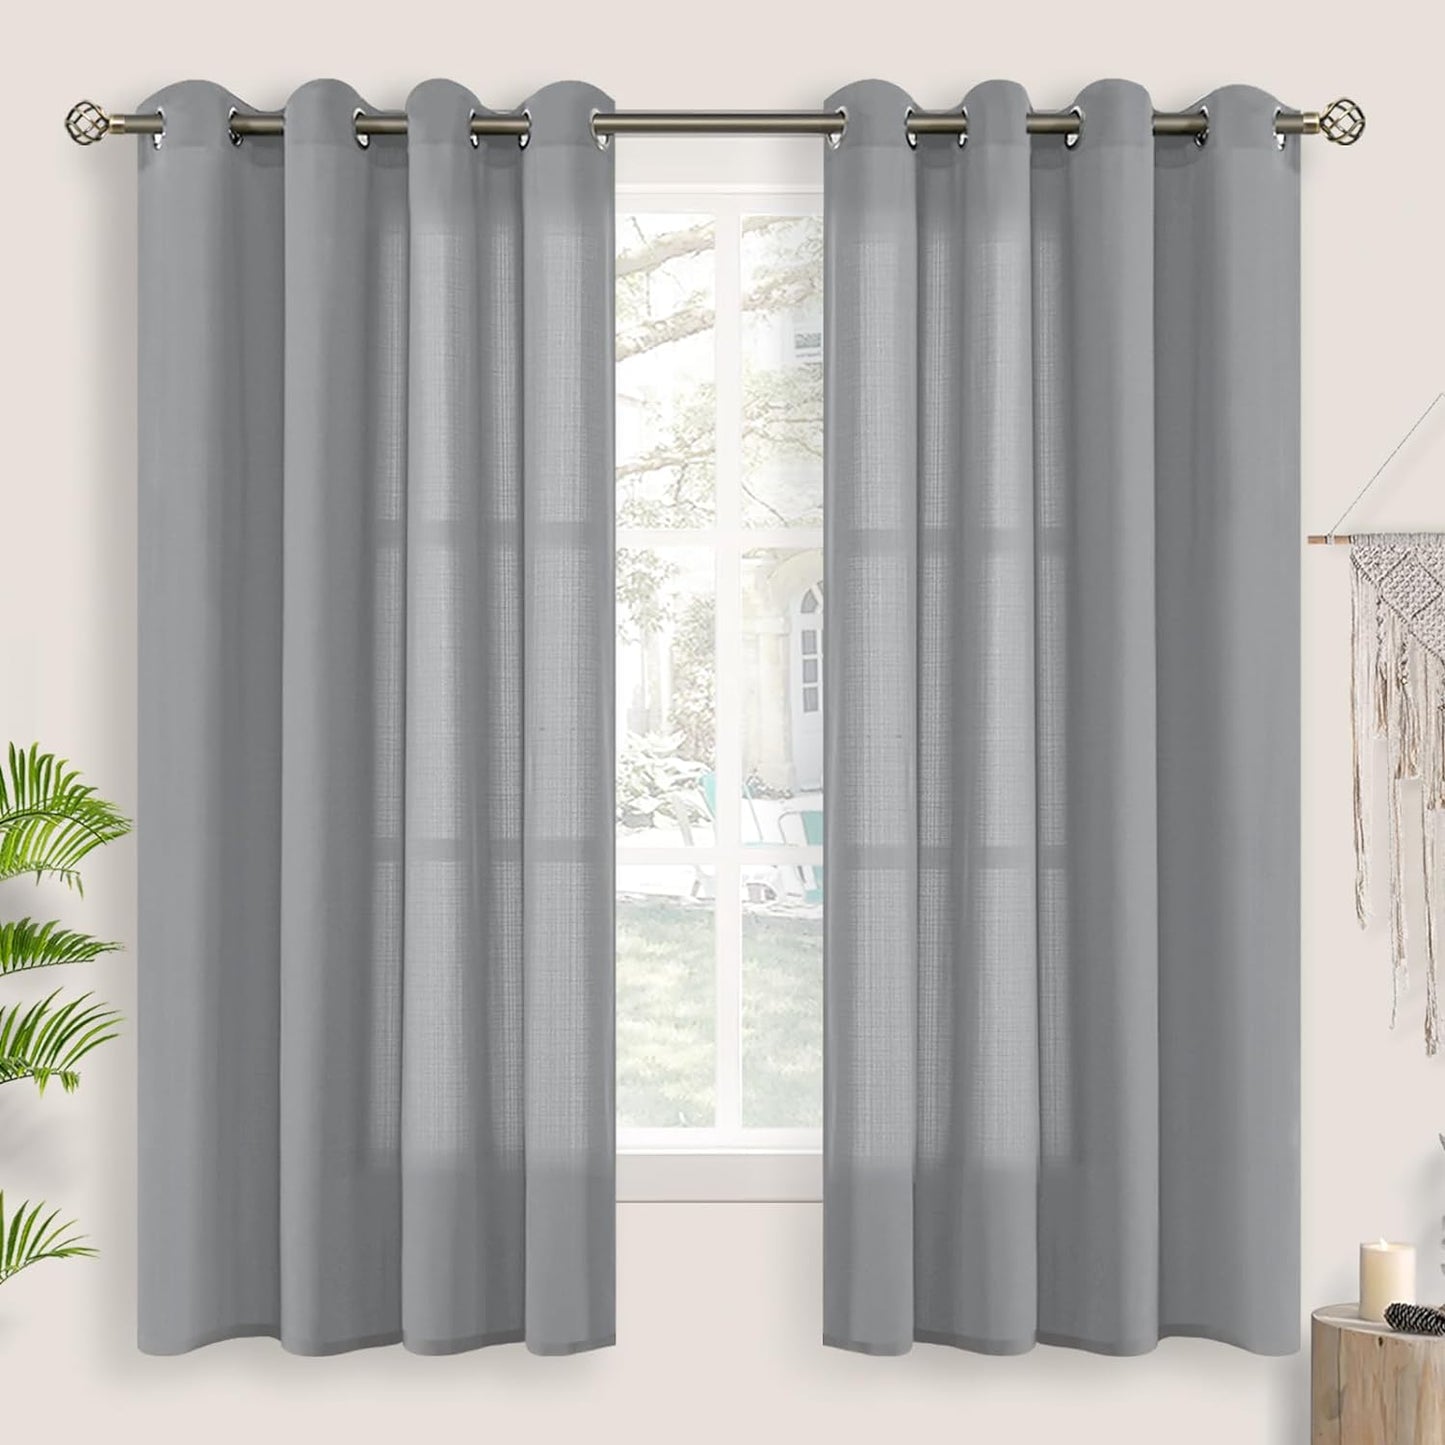 Bgment Natural Linen Look Semi Sheer Curtains for Bedroom, 52 X 54 Inch White Grommet Light Filtering Casual Textured Privacy Curtains for Bay Window, 2 Panels  BGment Grey 52W X 63L 